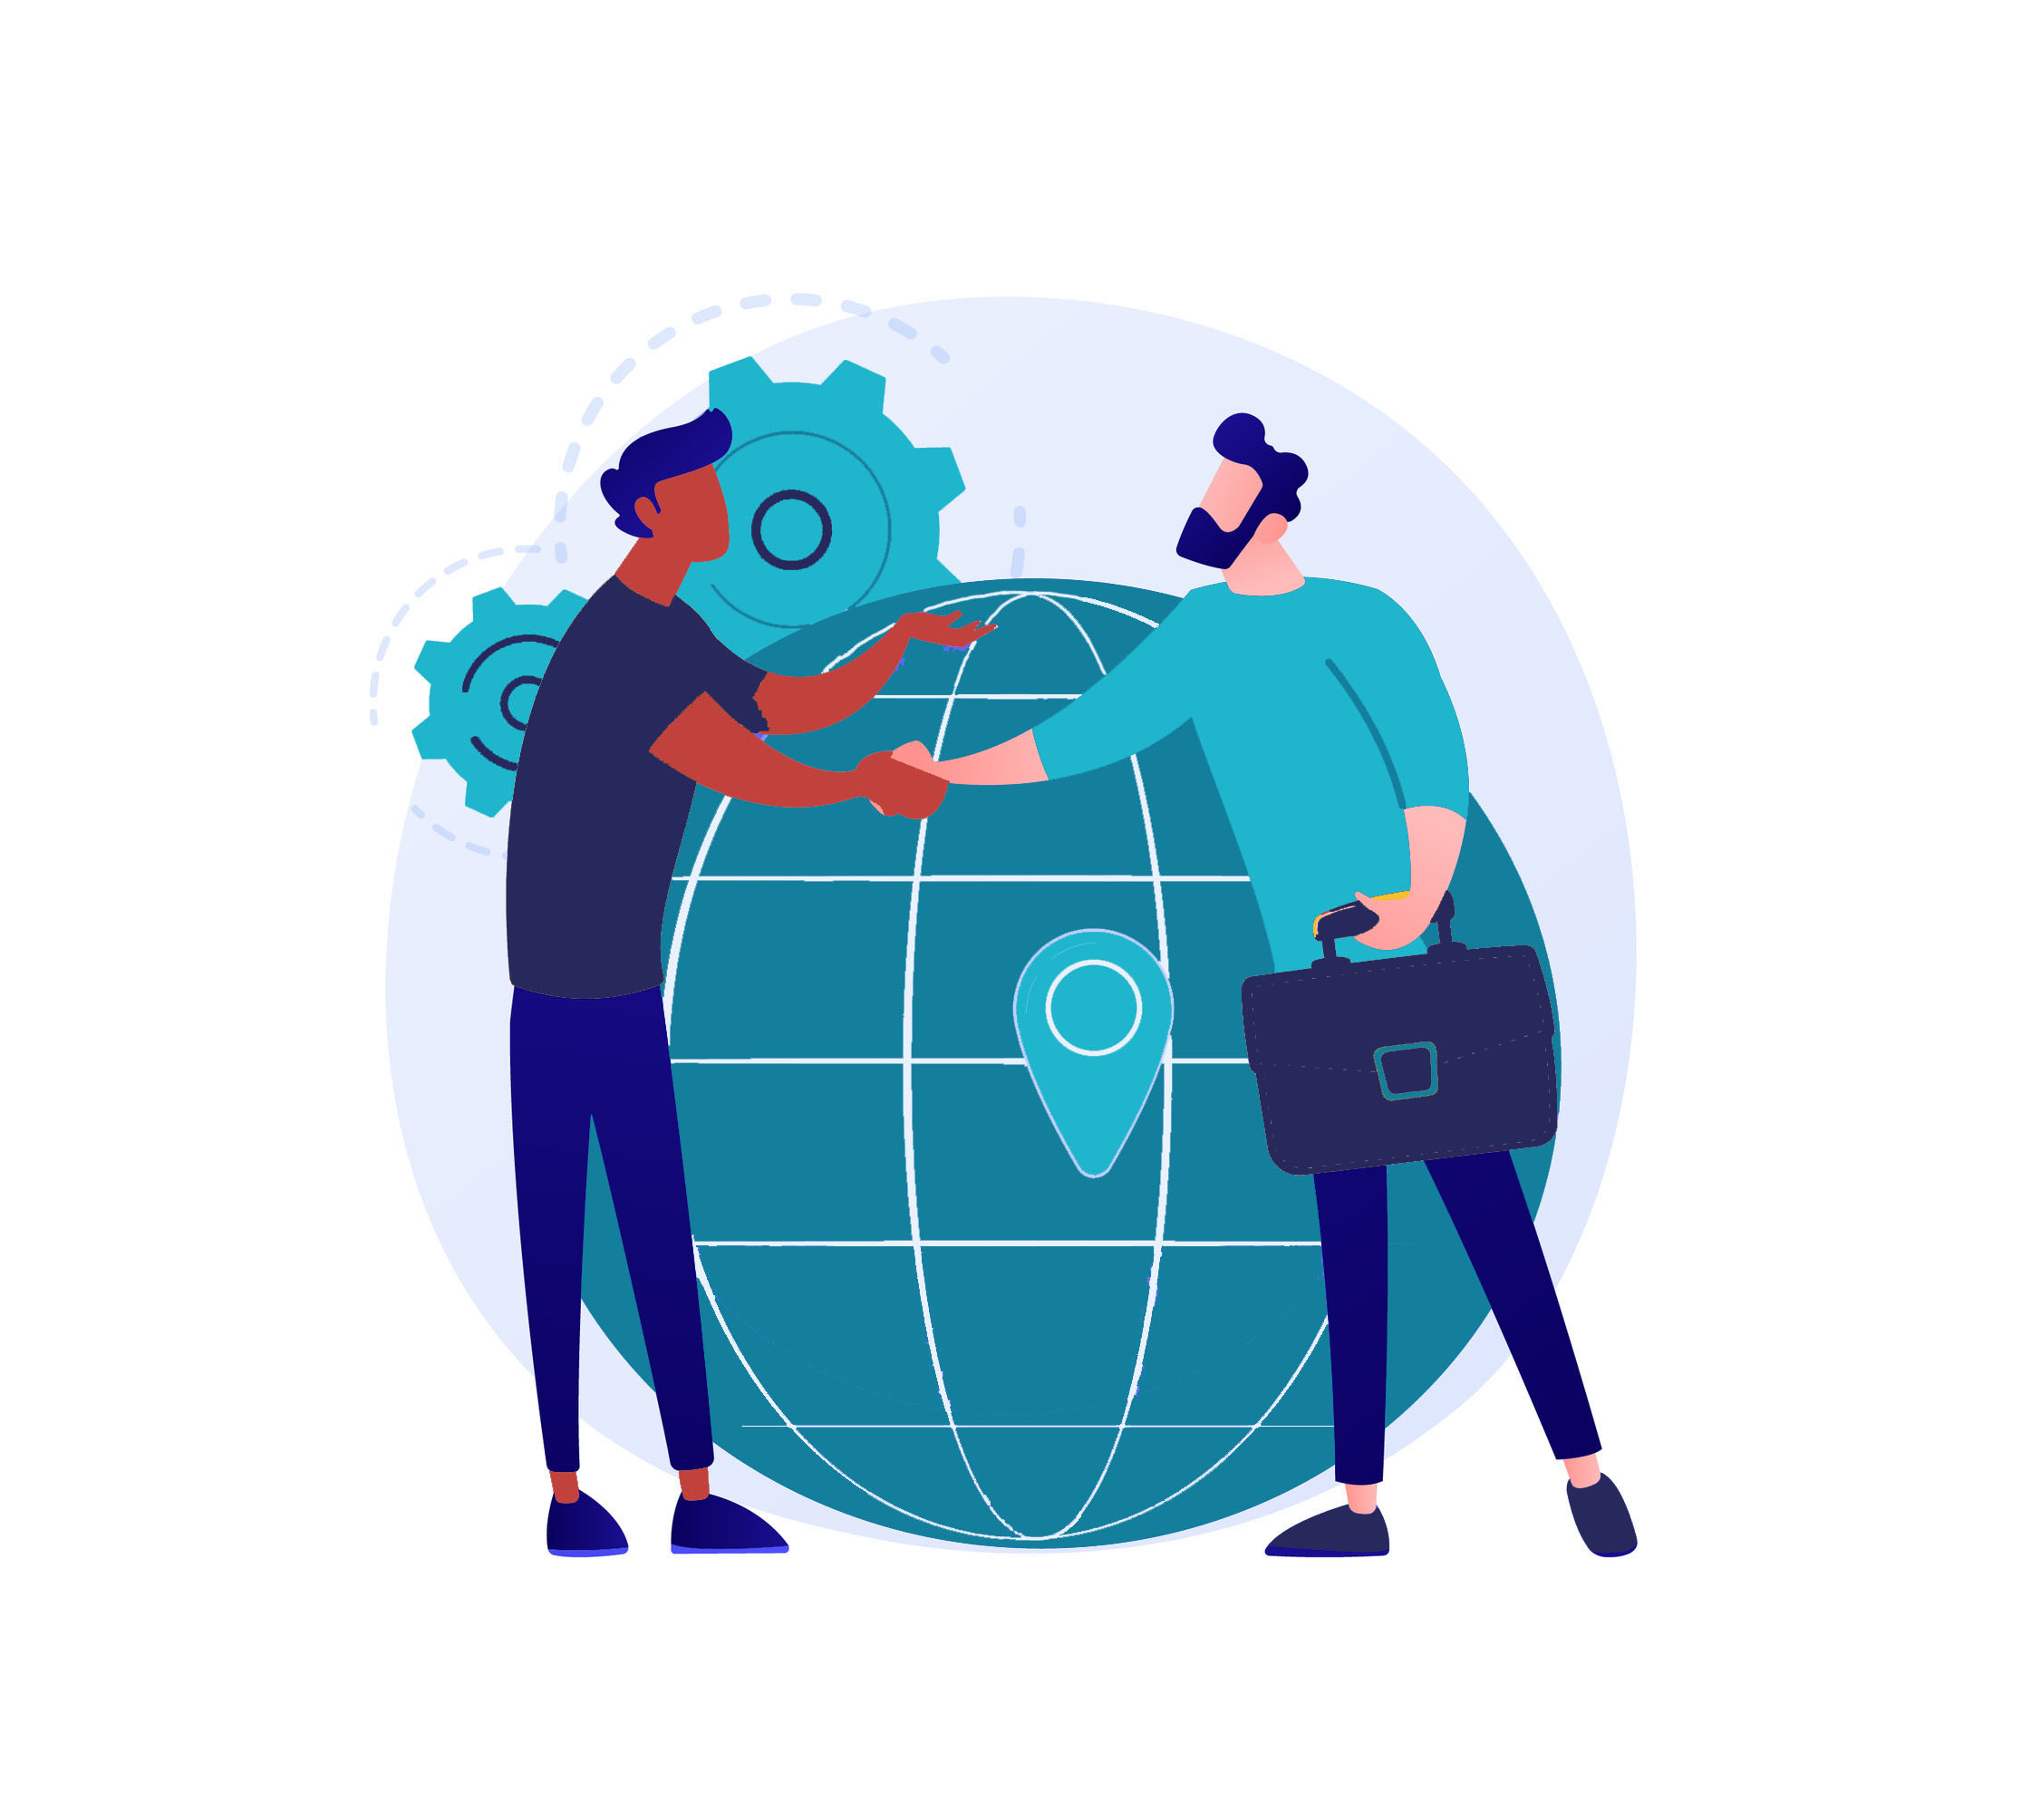 Illustration of planet and 2 people and digital devices